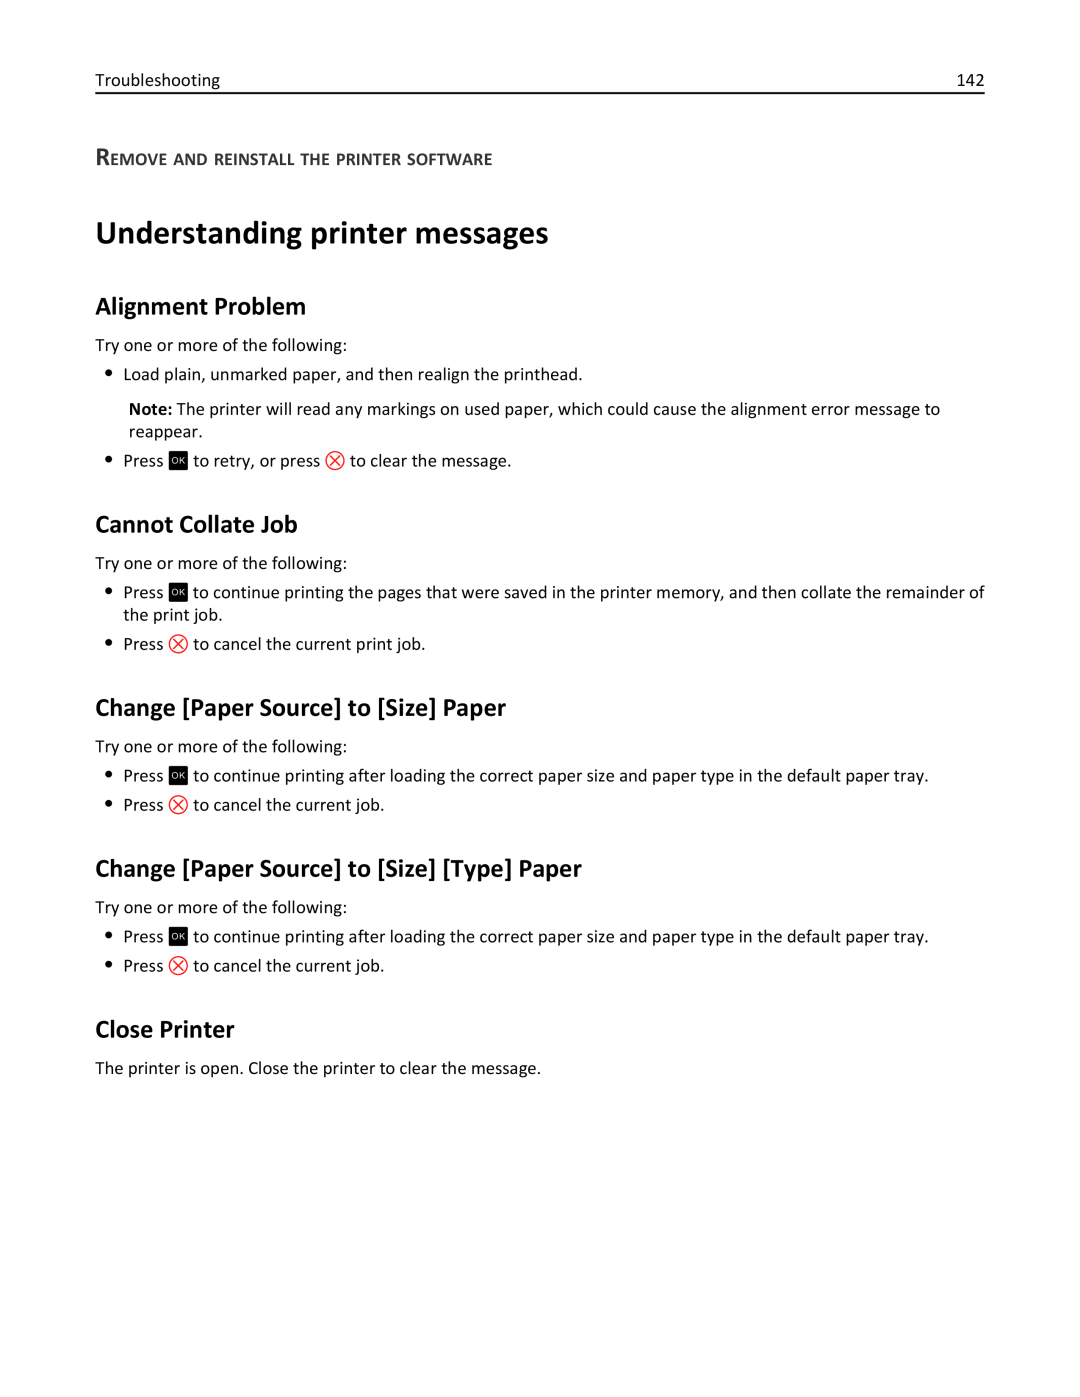 Lexmark PRO4000 Understanding printer messages, Alignment Problem, Cannot Collate Job, Change Paper Source to Size Paper 